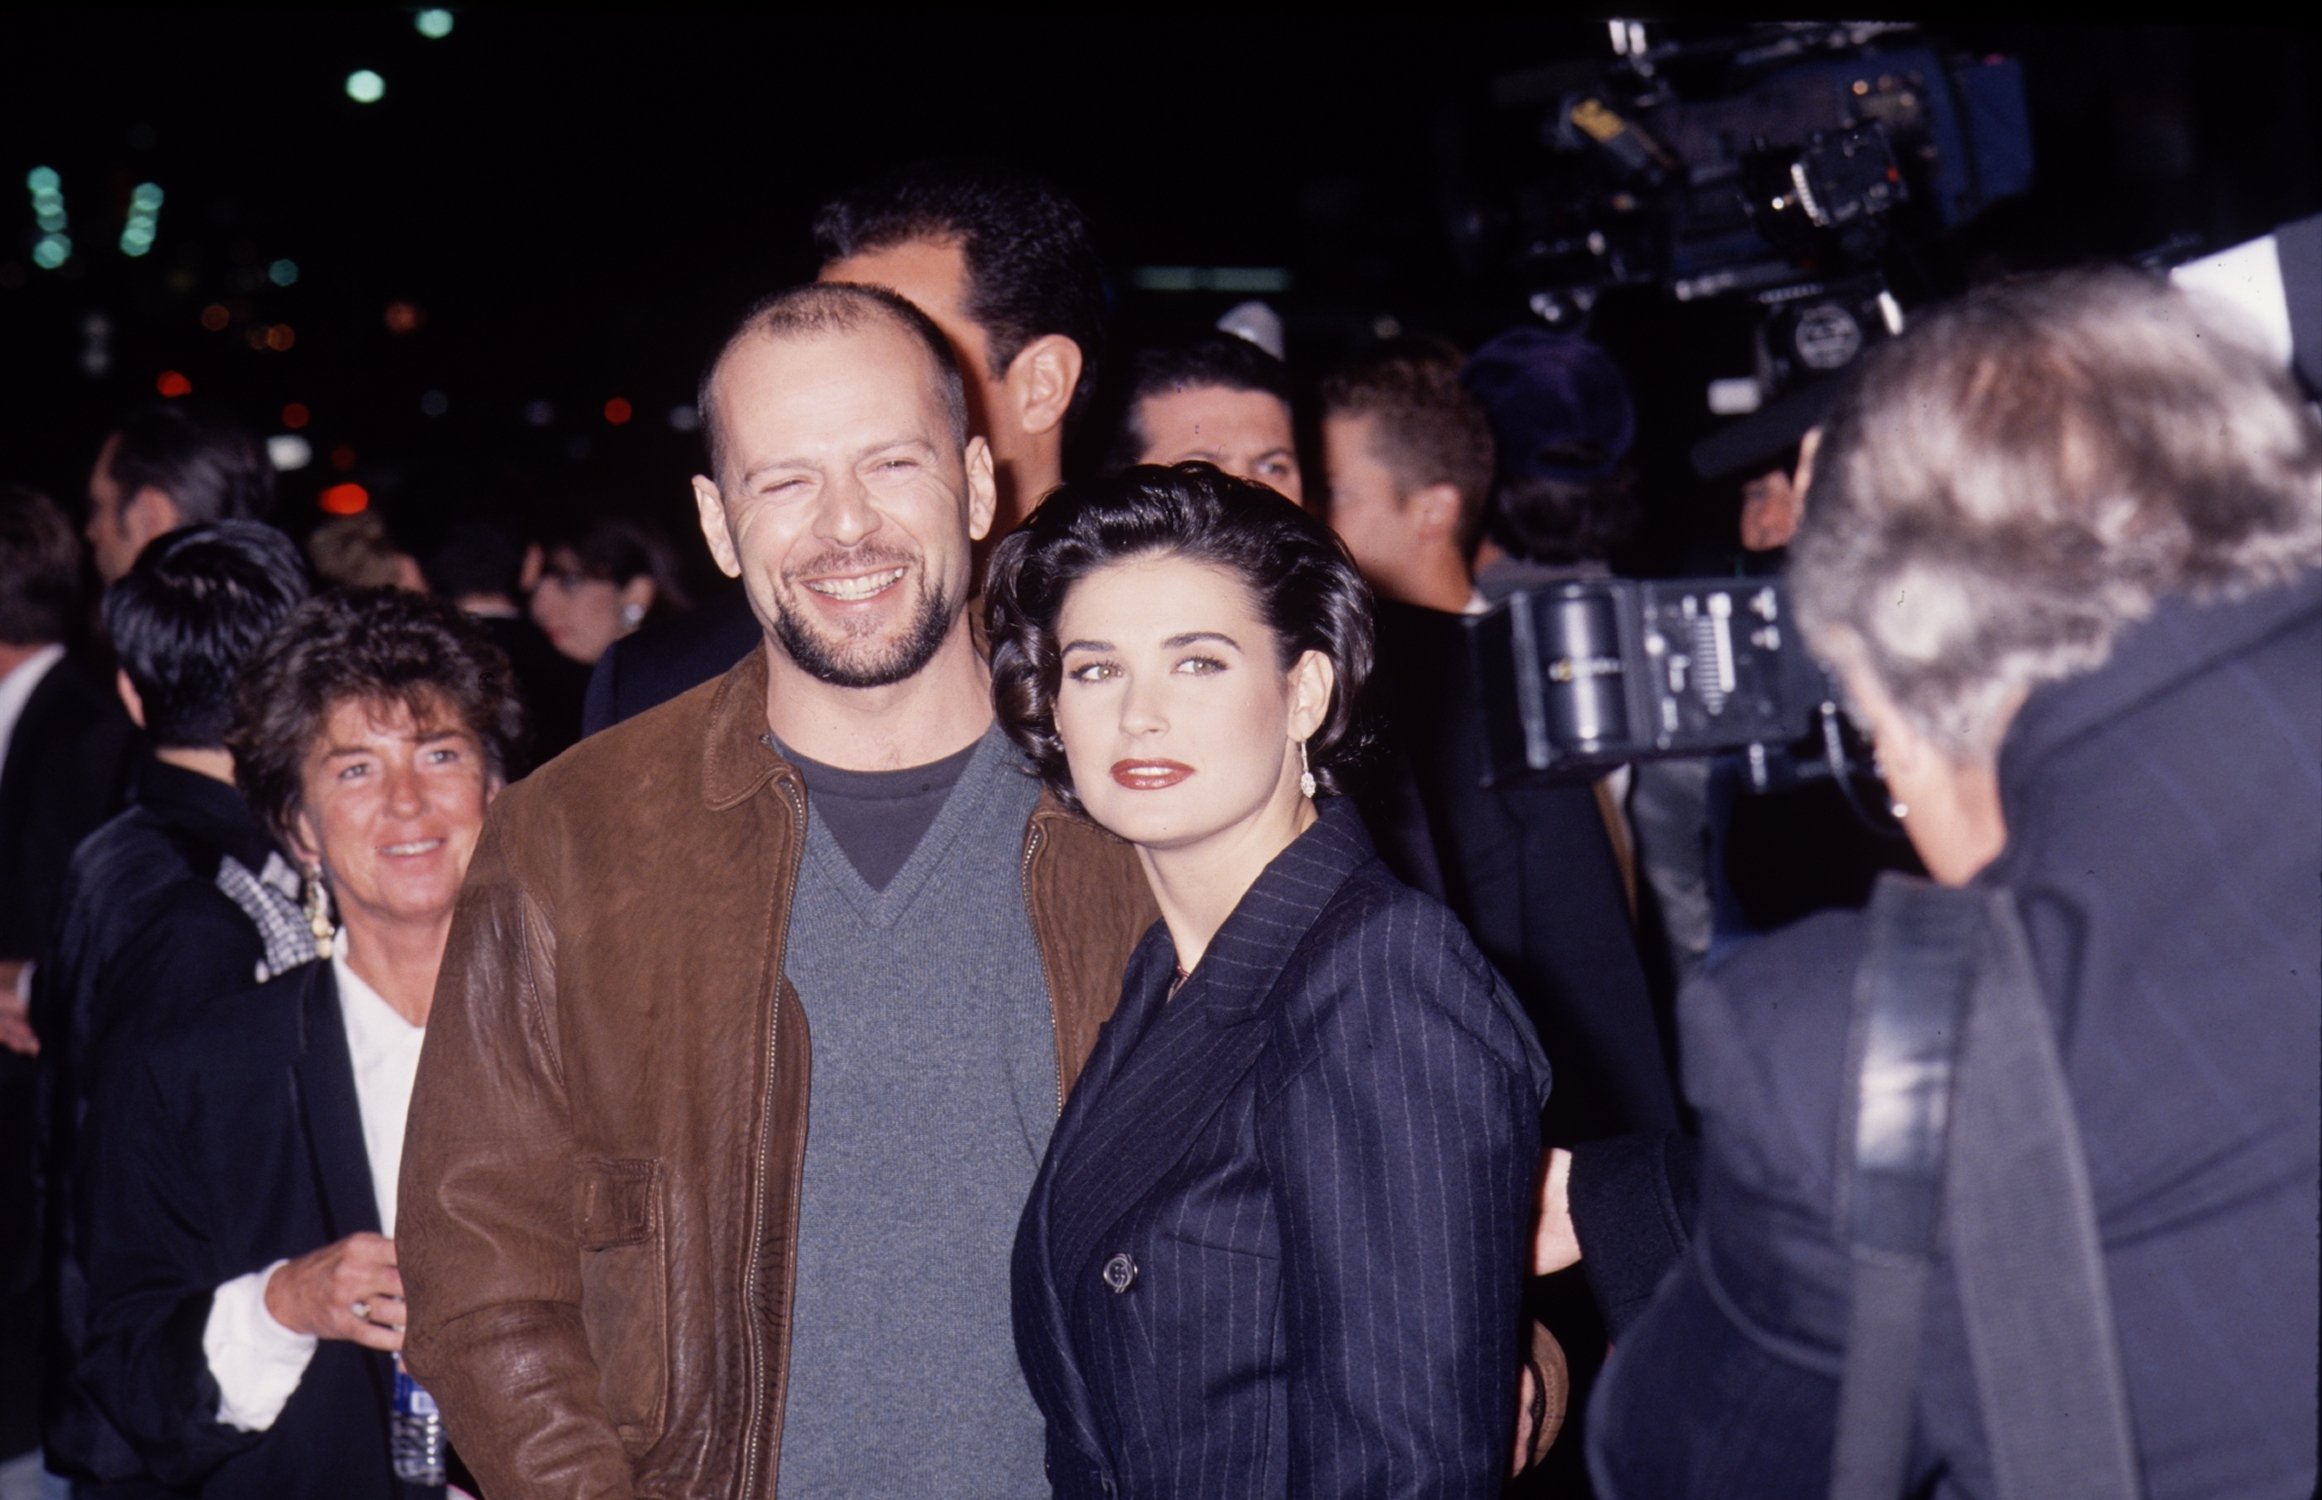 Bruce Willis and Demi Moore pictured together at an event during their relationship. | Photo: Getty Images